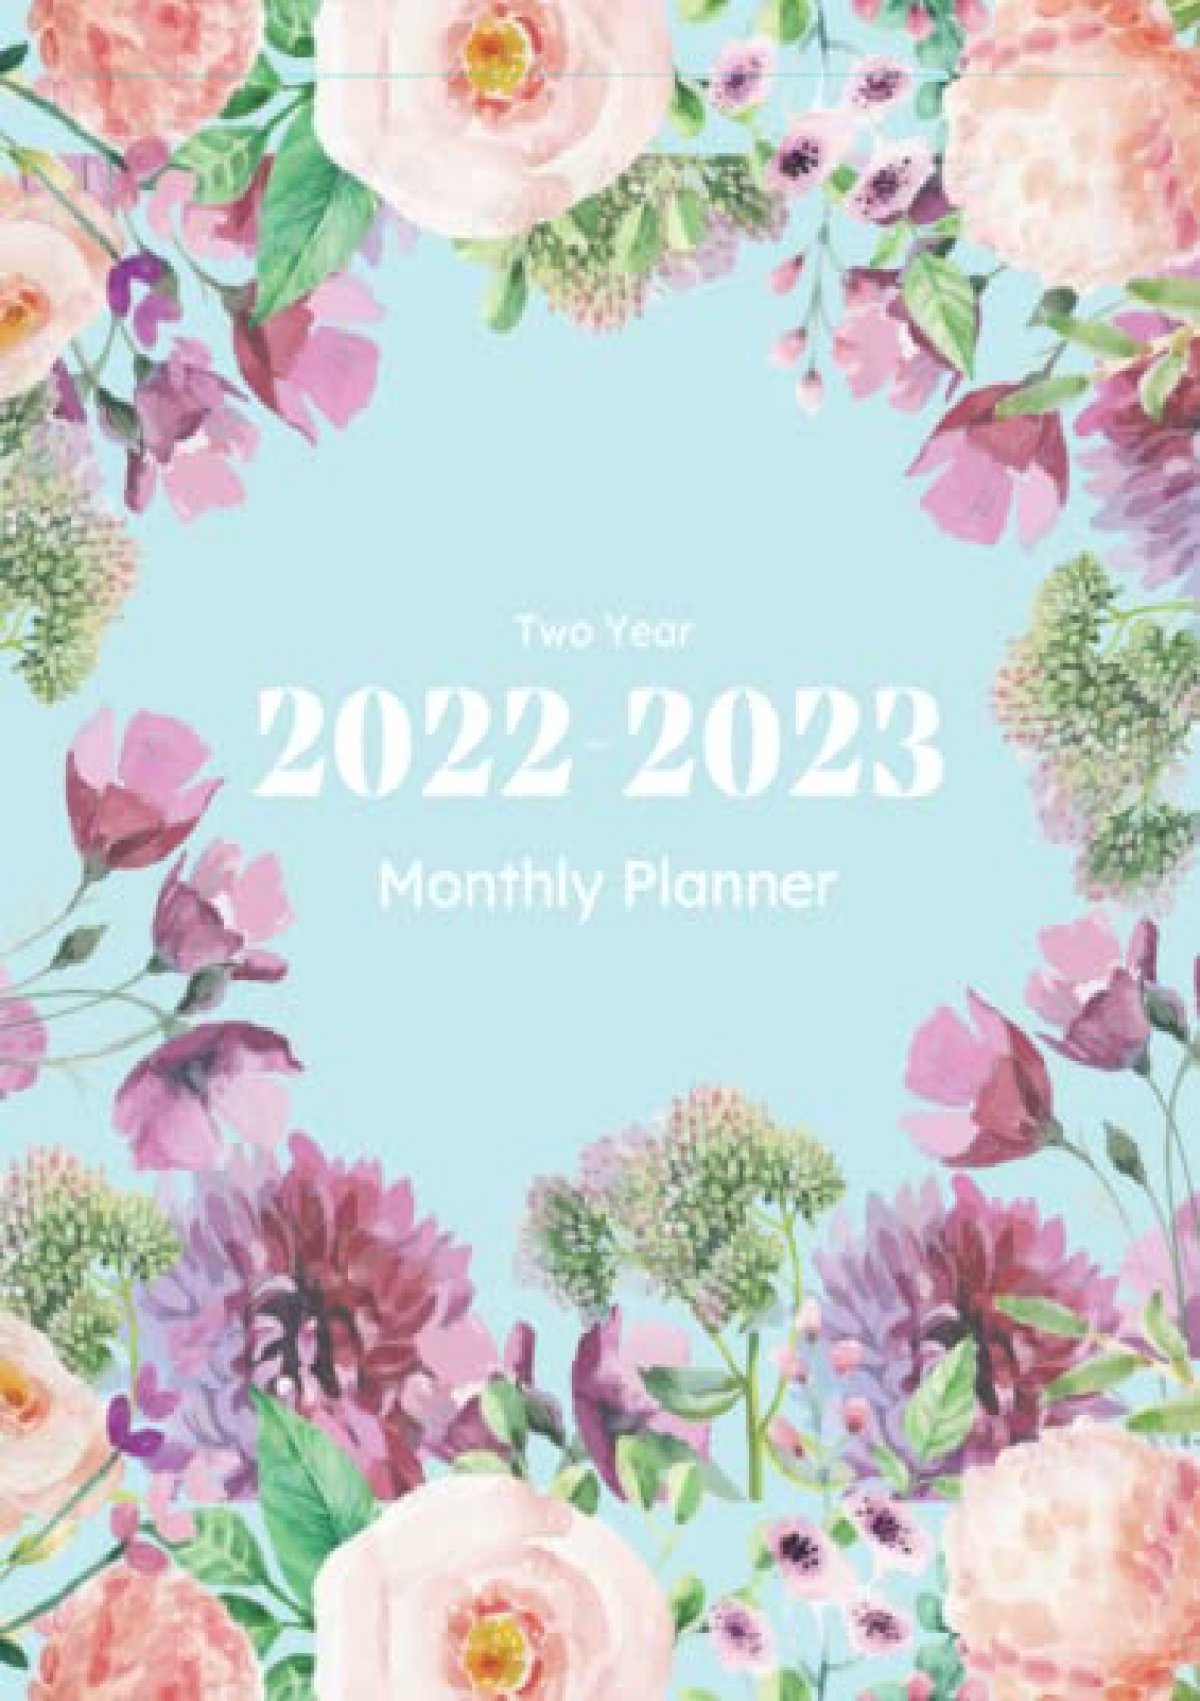 Download⚡️pdf ️ Two Year 2022 2023 Monthly Planner See It Bigger Pretty Two Year 